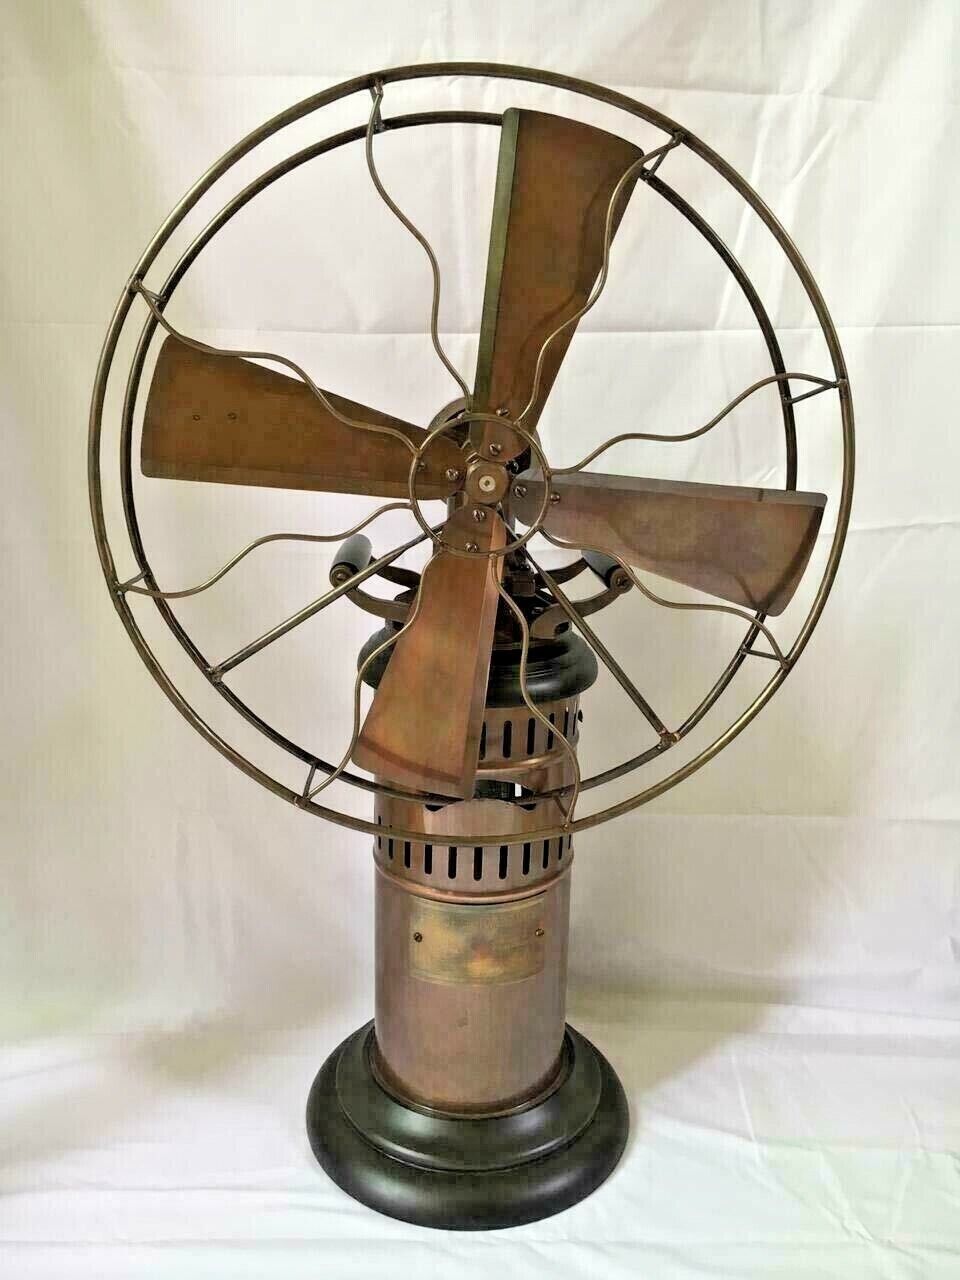 Steam Operated Antique Kerosene oil Fan Working Collectibles Museum Vintage